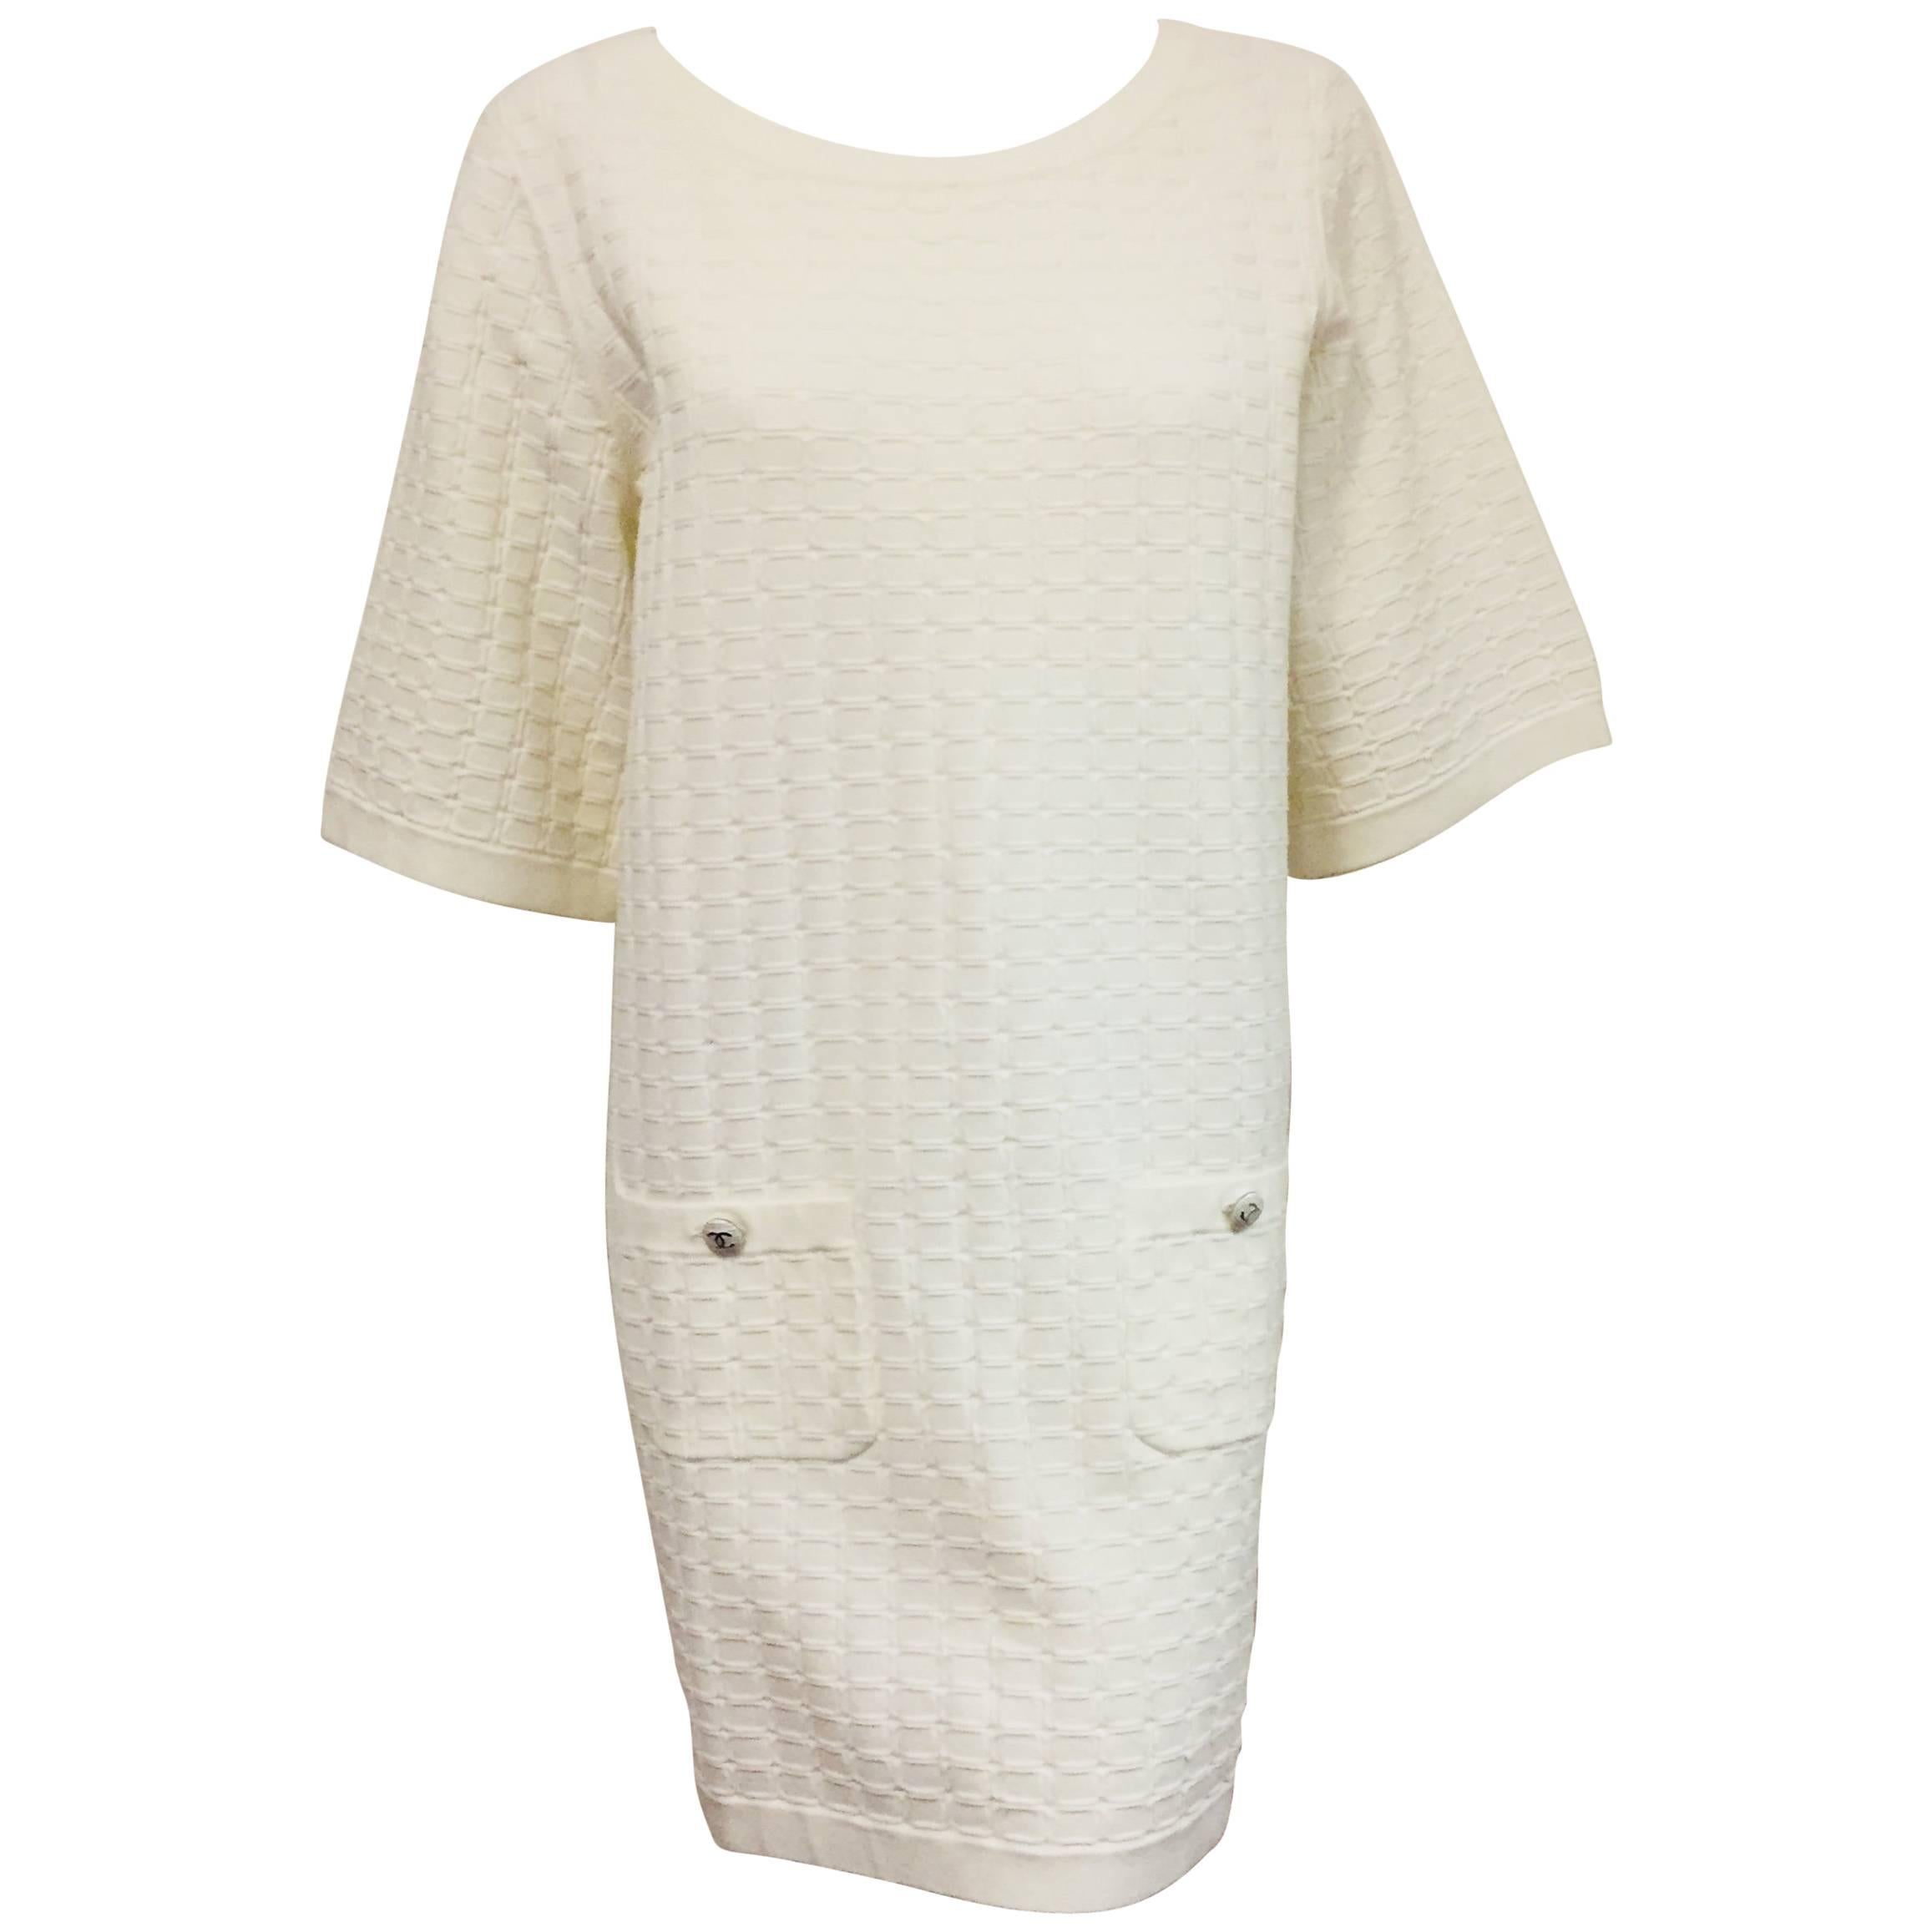 Chanel Cruise Collection White Cotton Blend Dress